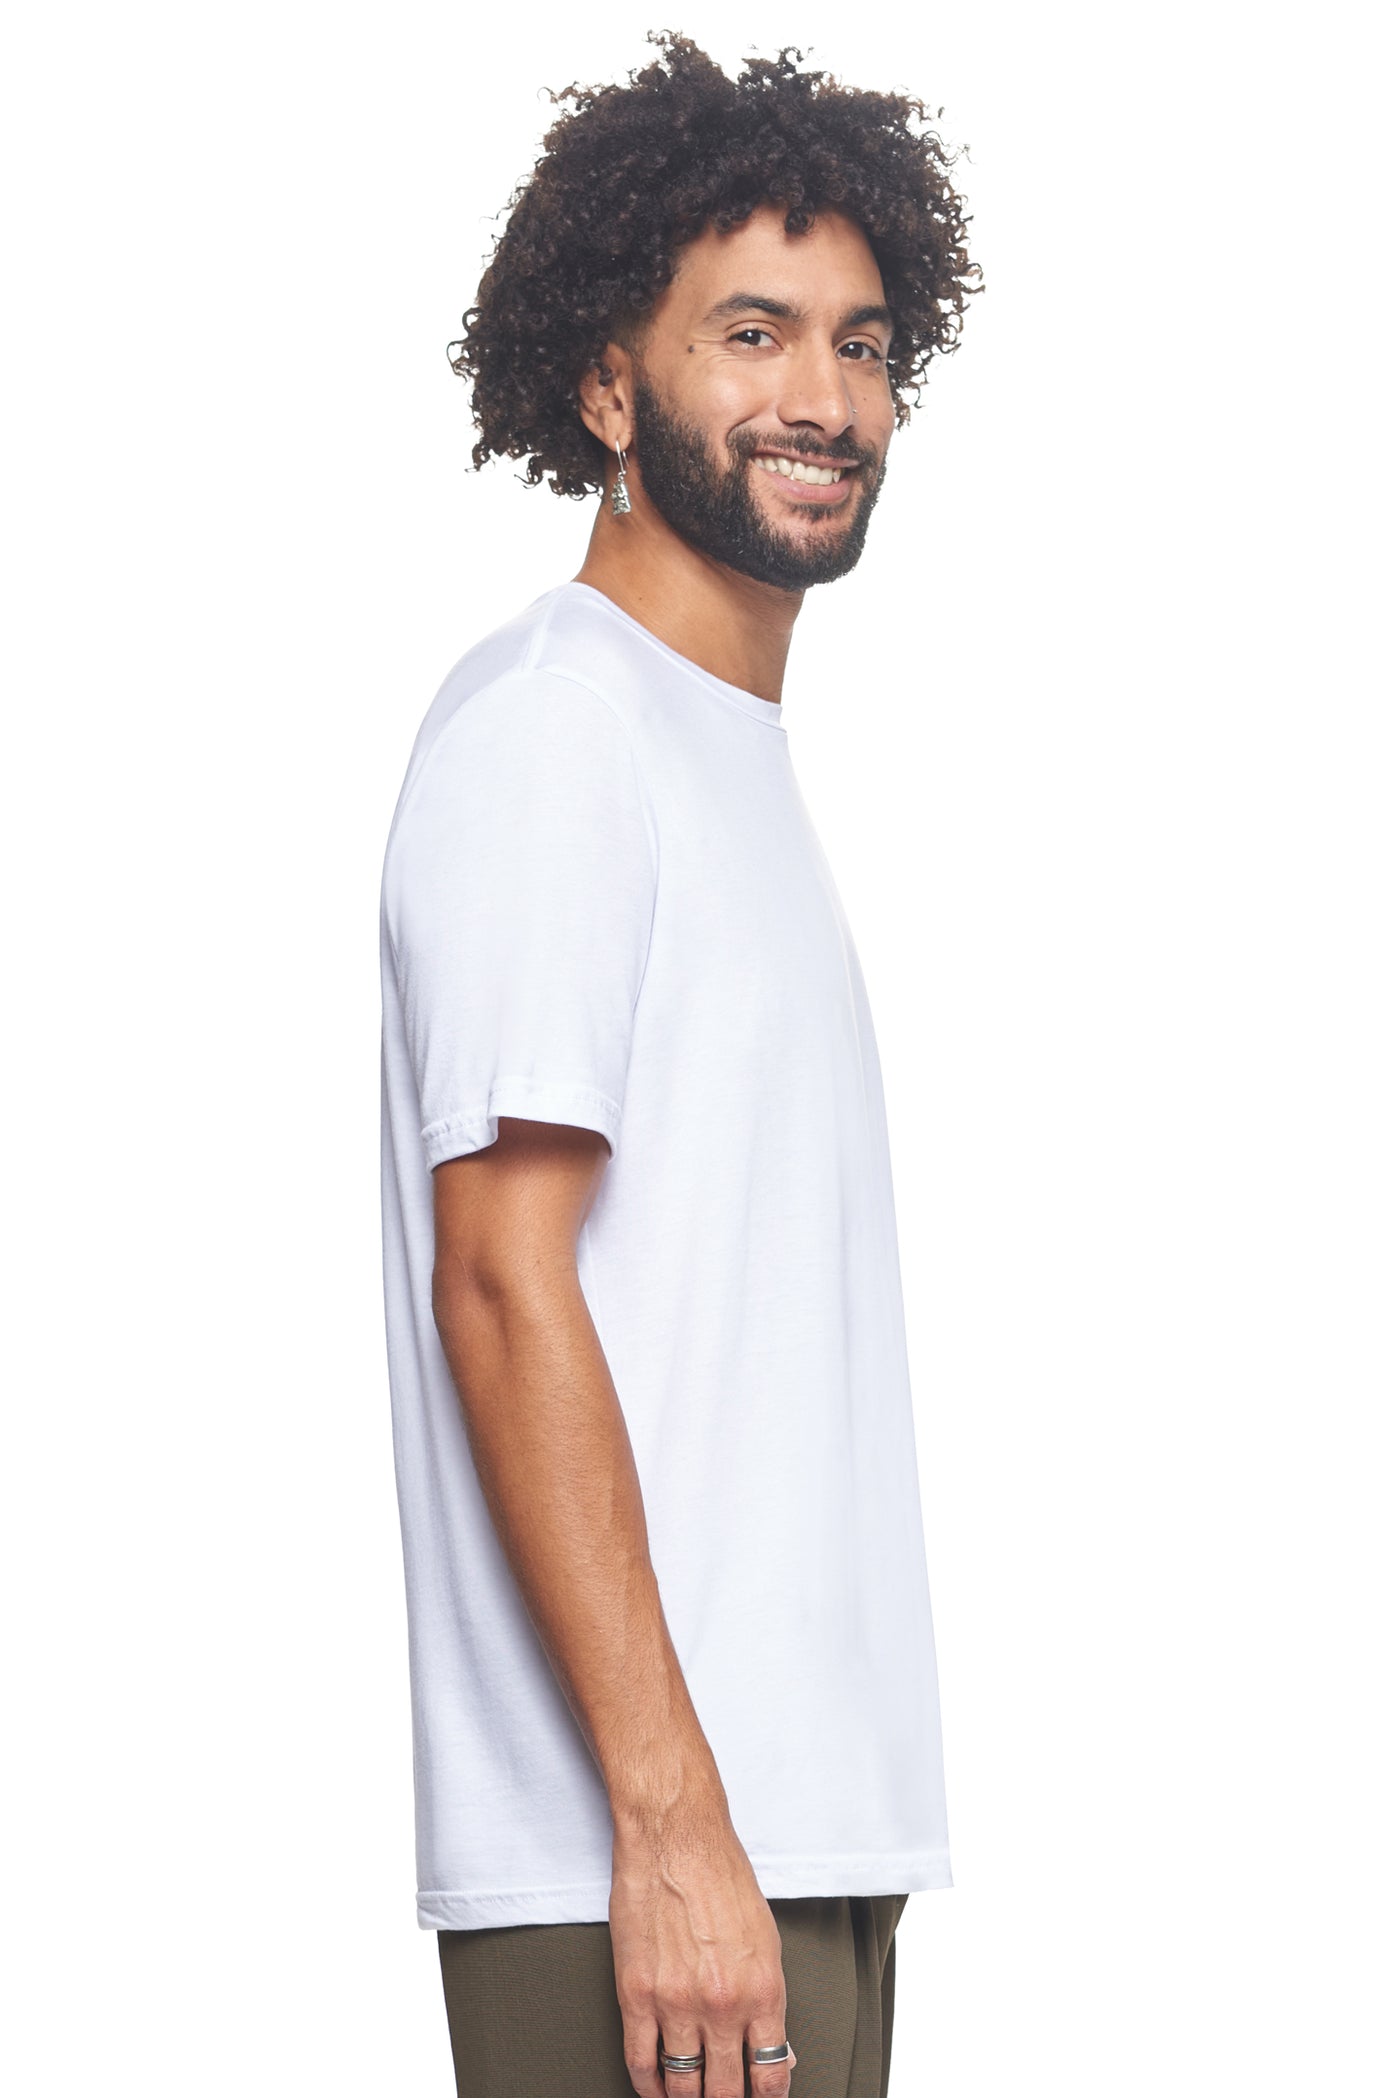 Expert Brand Retail Sustainable Eco-Friendly Hemp Organic Cotton Men's crewneck T-Shirt Made in the USA white 2#color_white